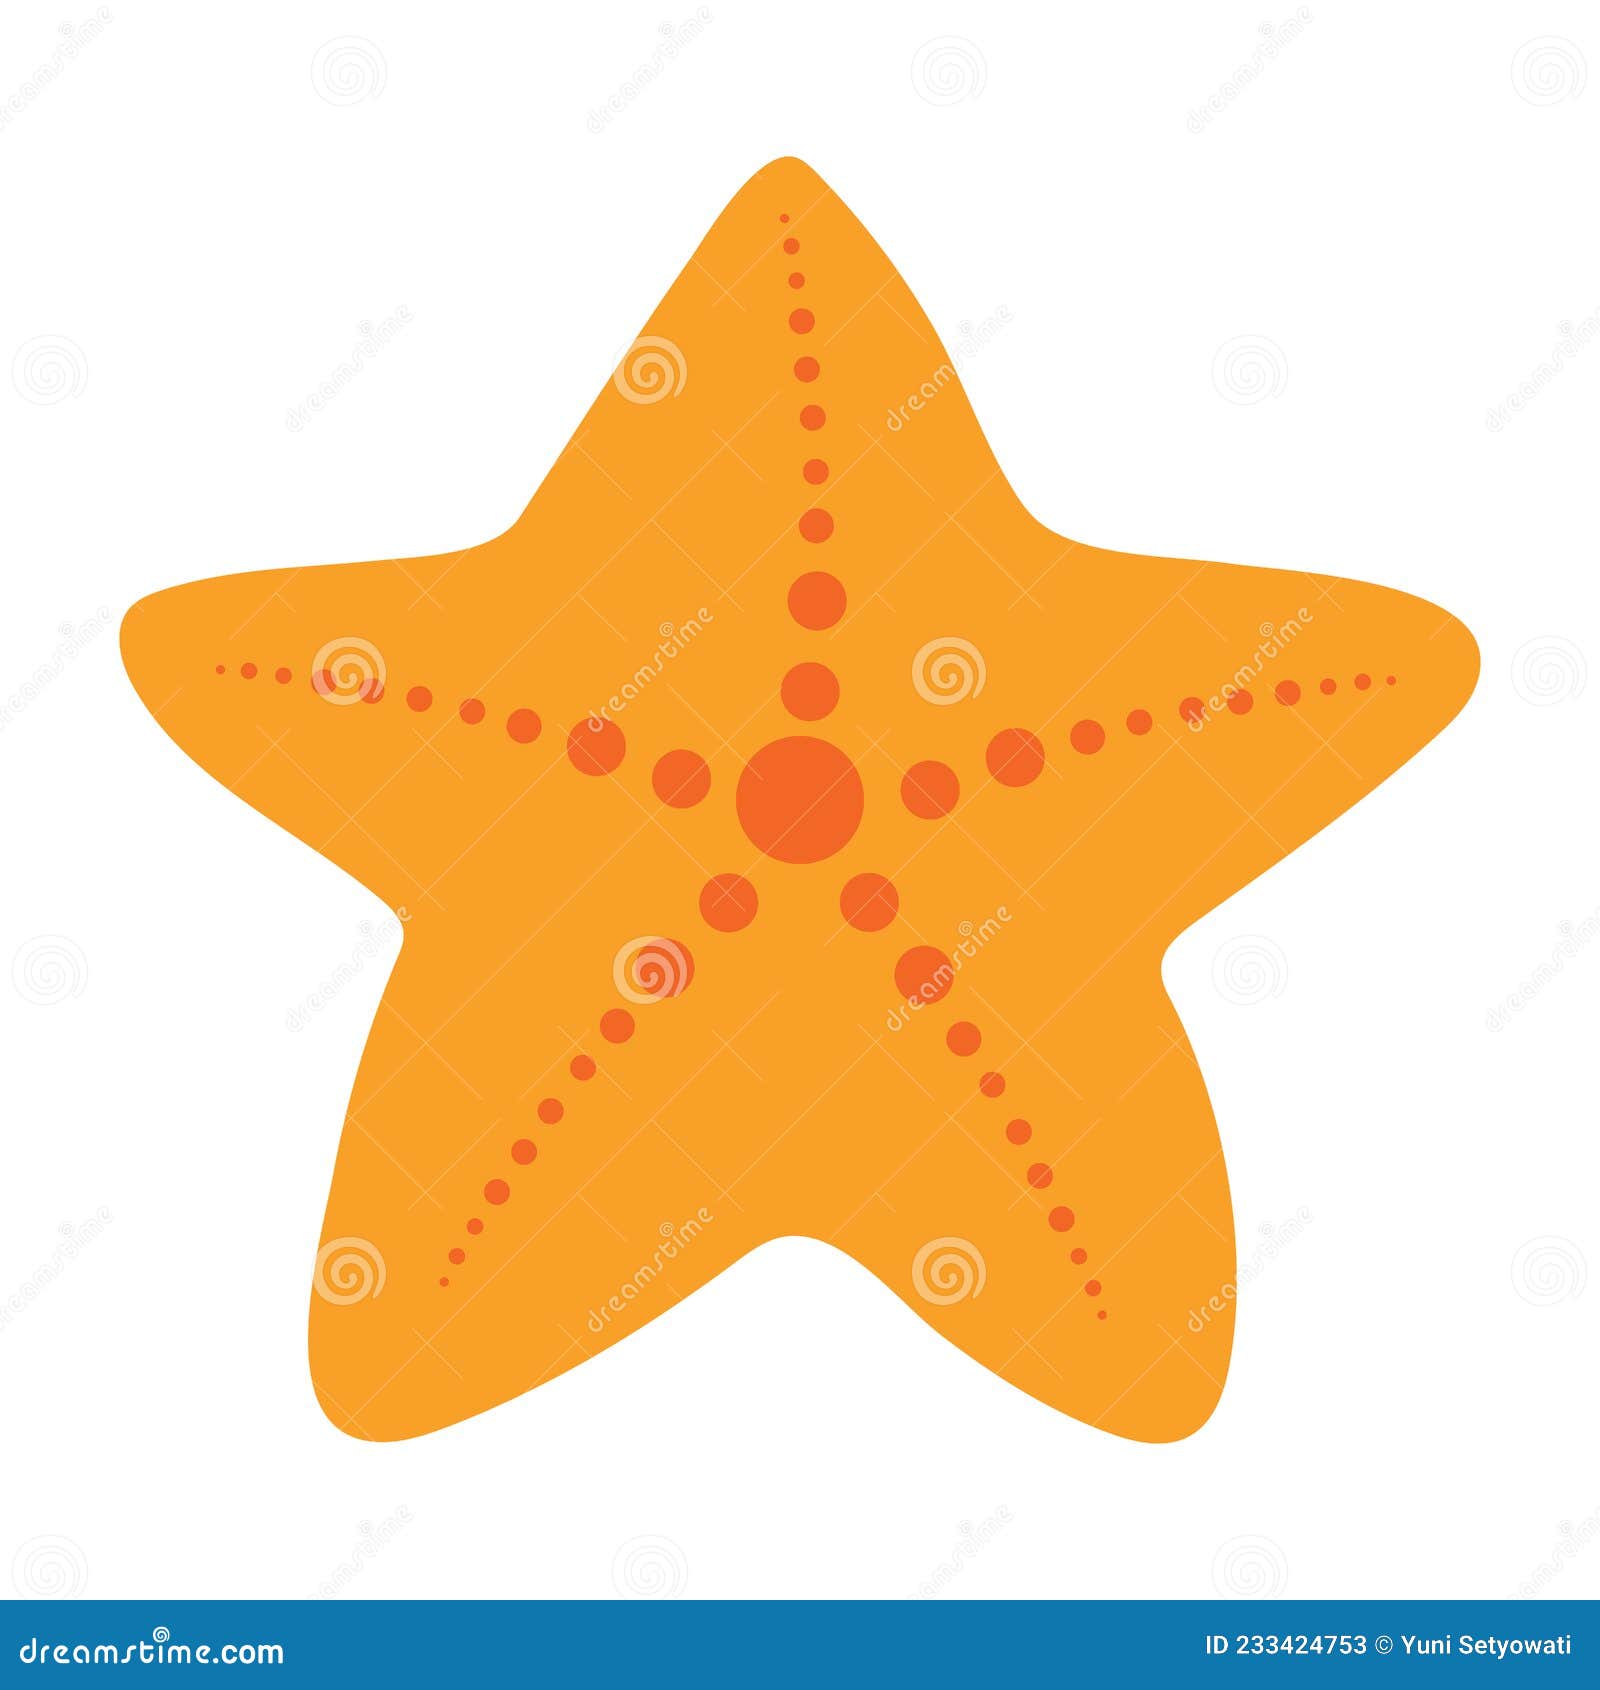 Cute Starfish Clipart Icon Png in Flat Cartoon Vector Design Stock Image -  Illustration of cartoon, nature: 233424753